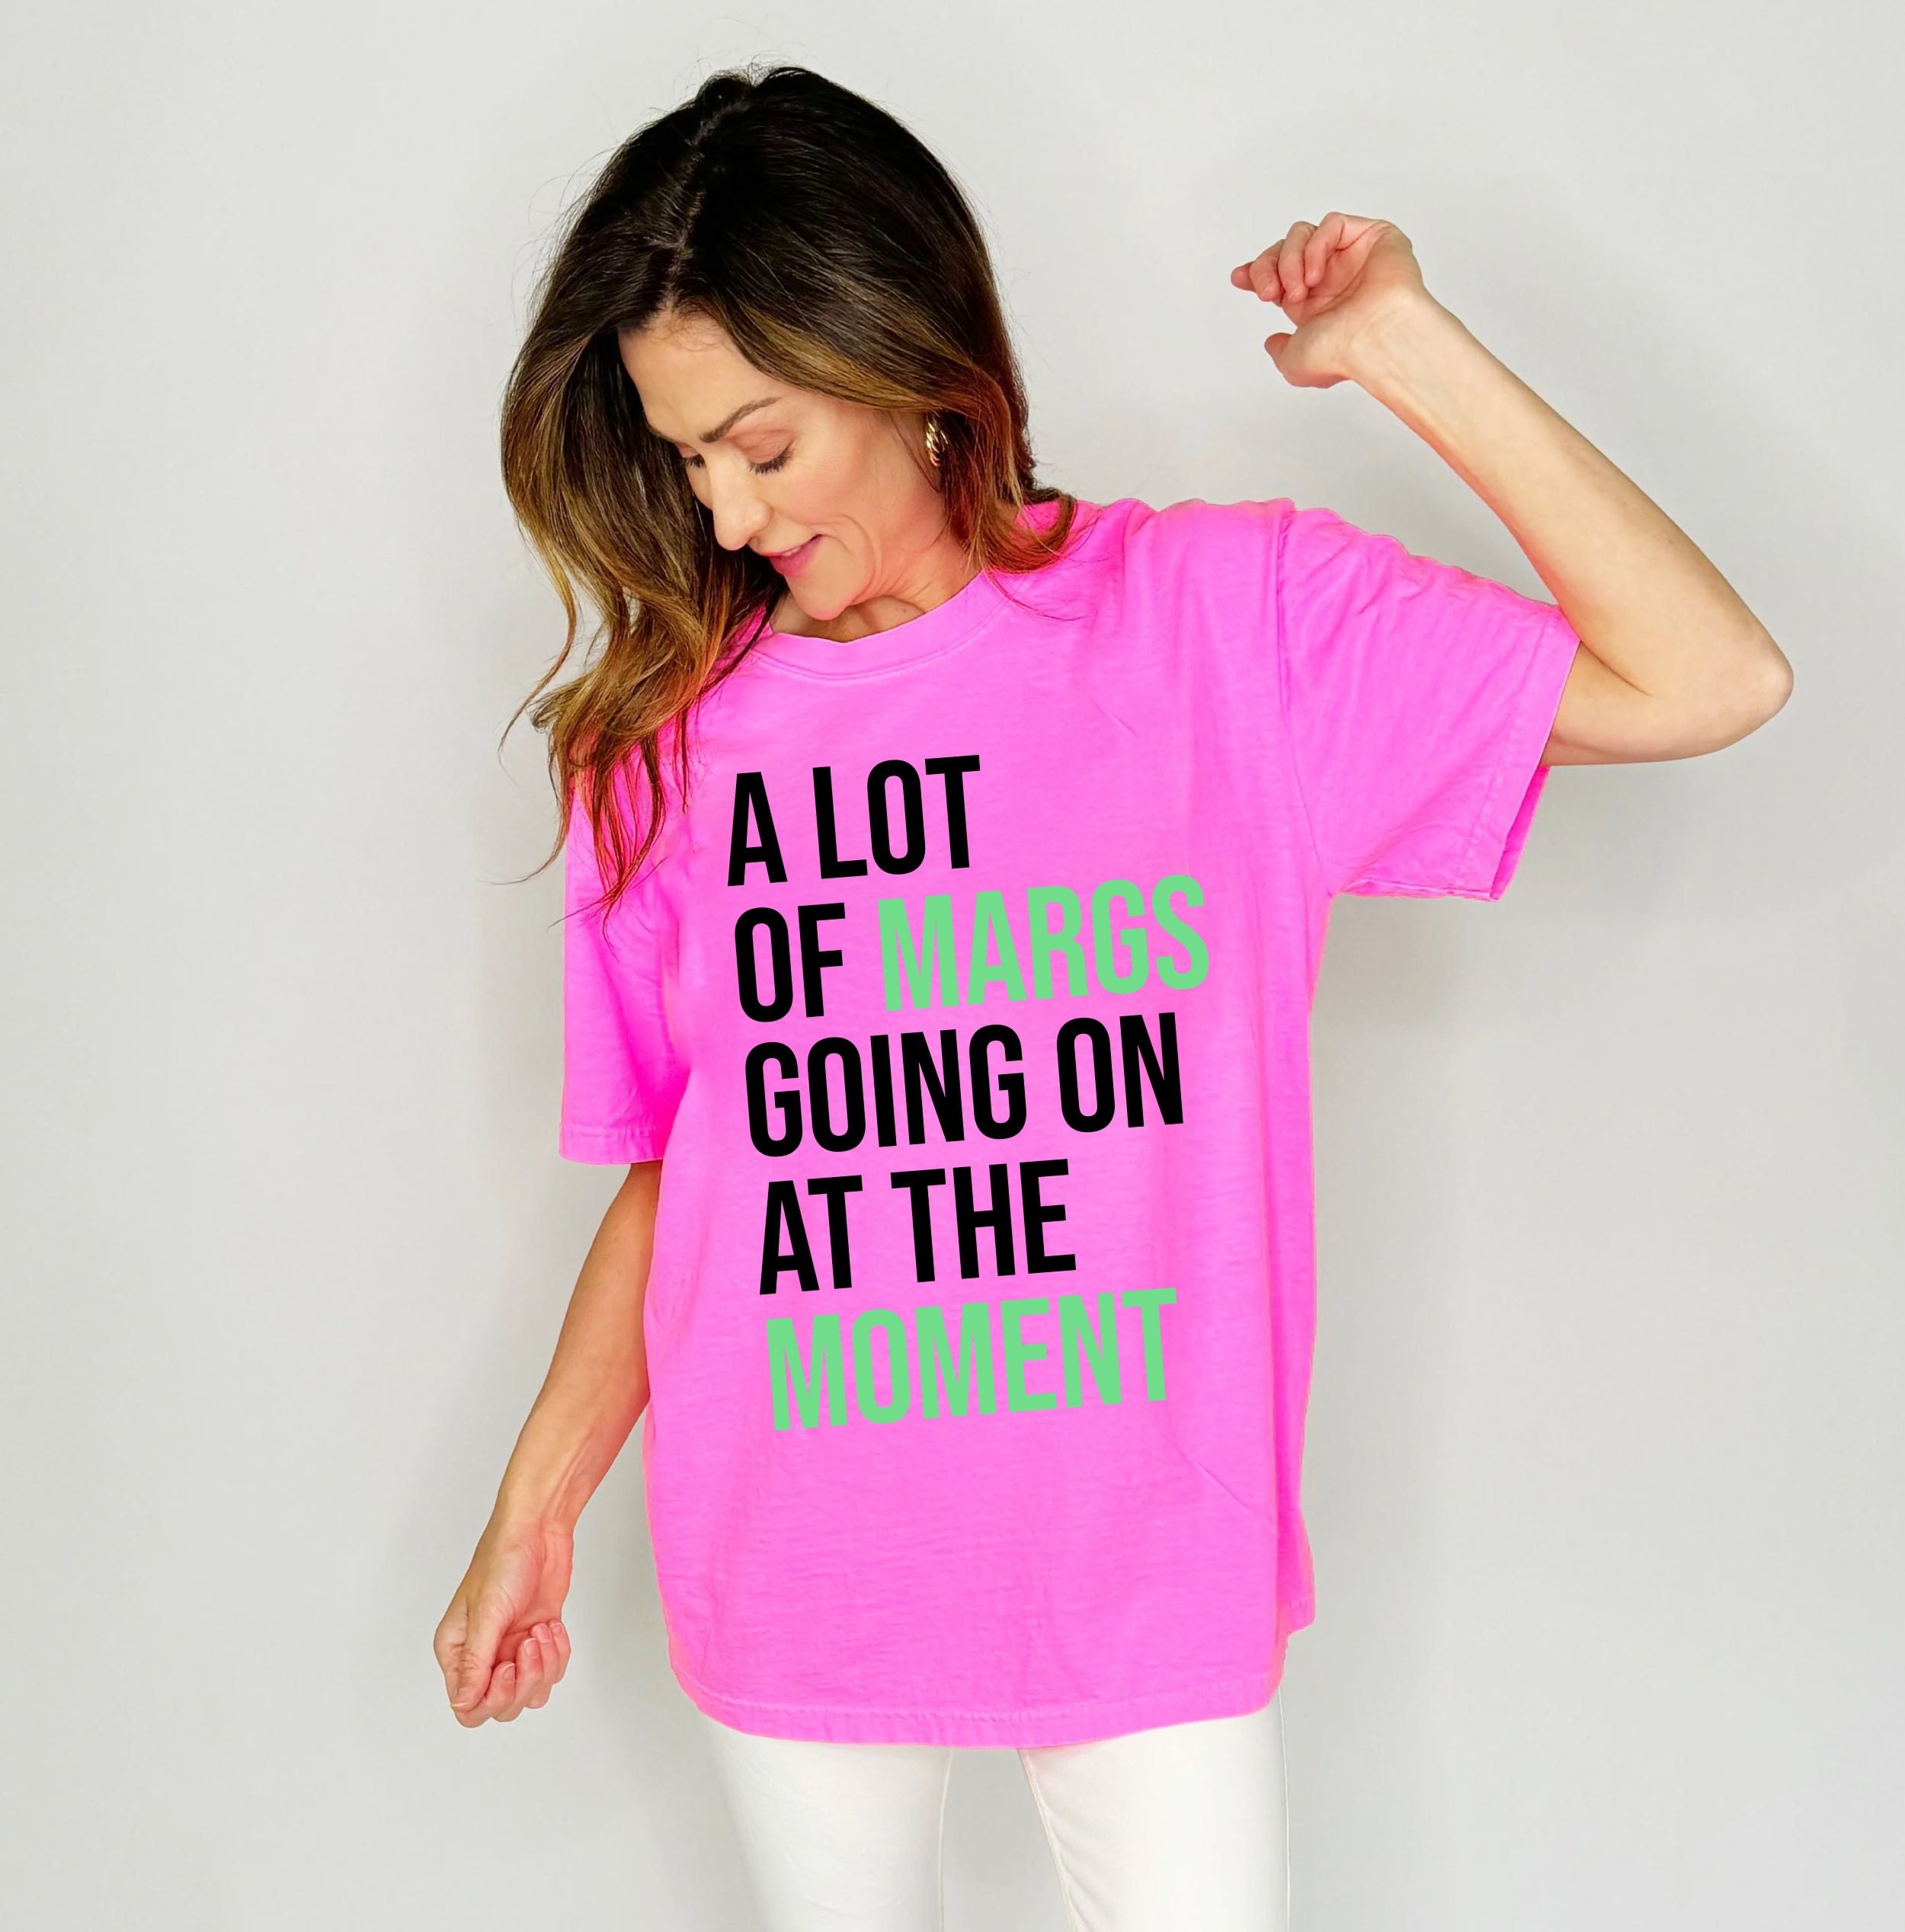 A Lot of Margs Going On At The Moment Tee